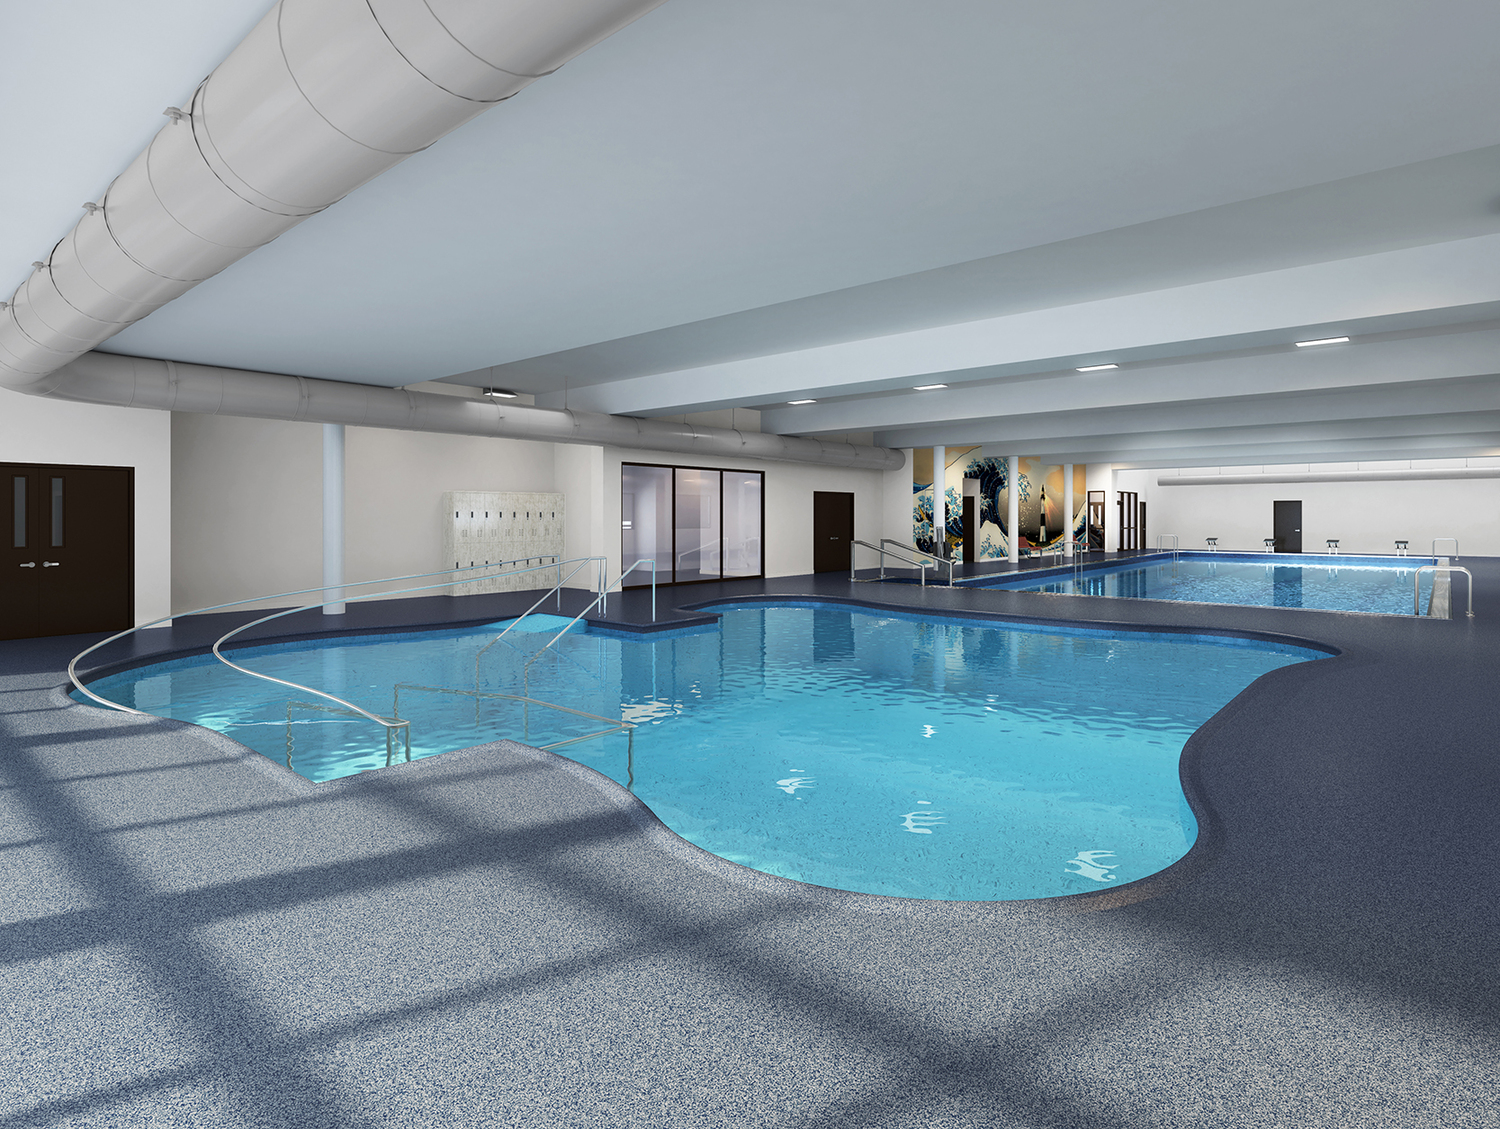 The aquatic center will feature two swimming pools, one a lap pool, the other a shallow pool for acclimating small children to the water and for therapy programs. MONTAUK PLAYHOUSE